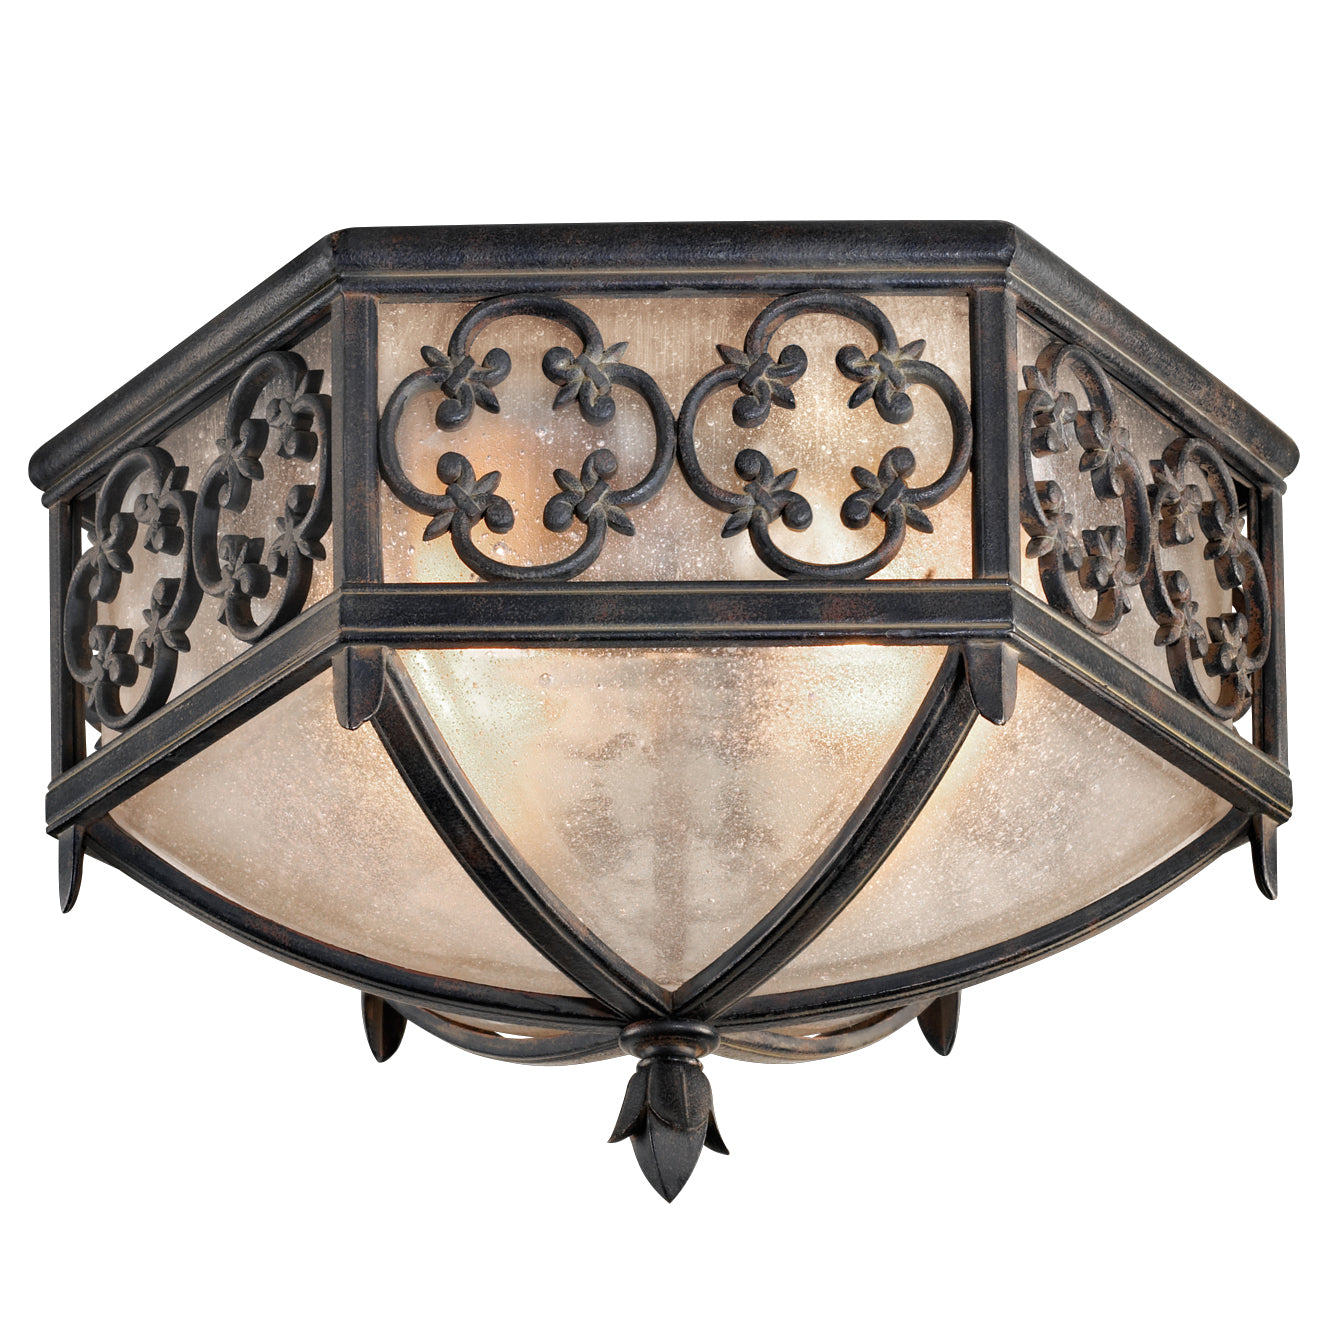 Fine Art Costa del Sol Outdoor Flush Mount Outdoor l Wall Fine Art Handcrafted Lighting Wrought Iron  